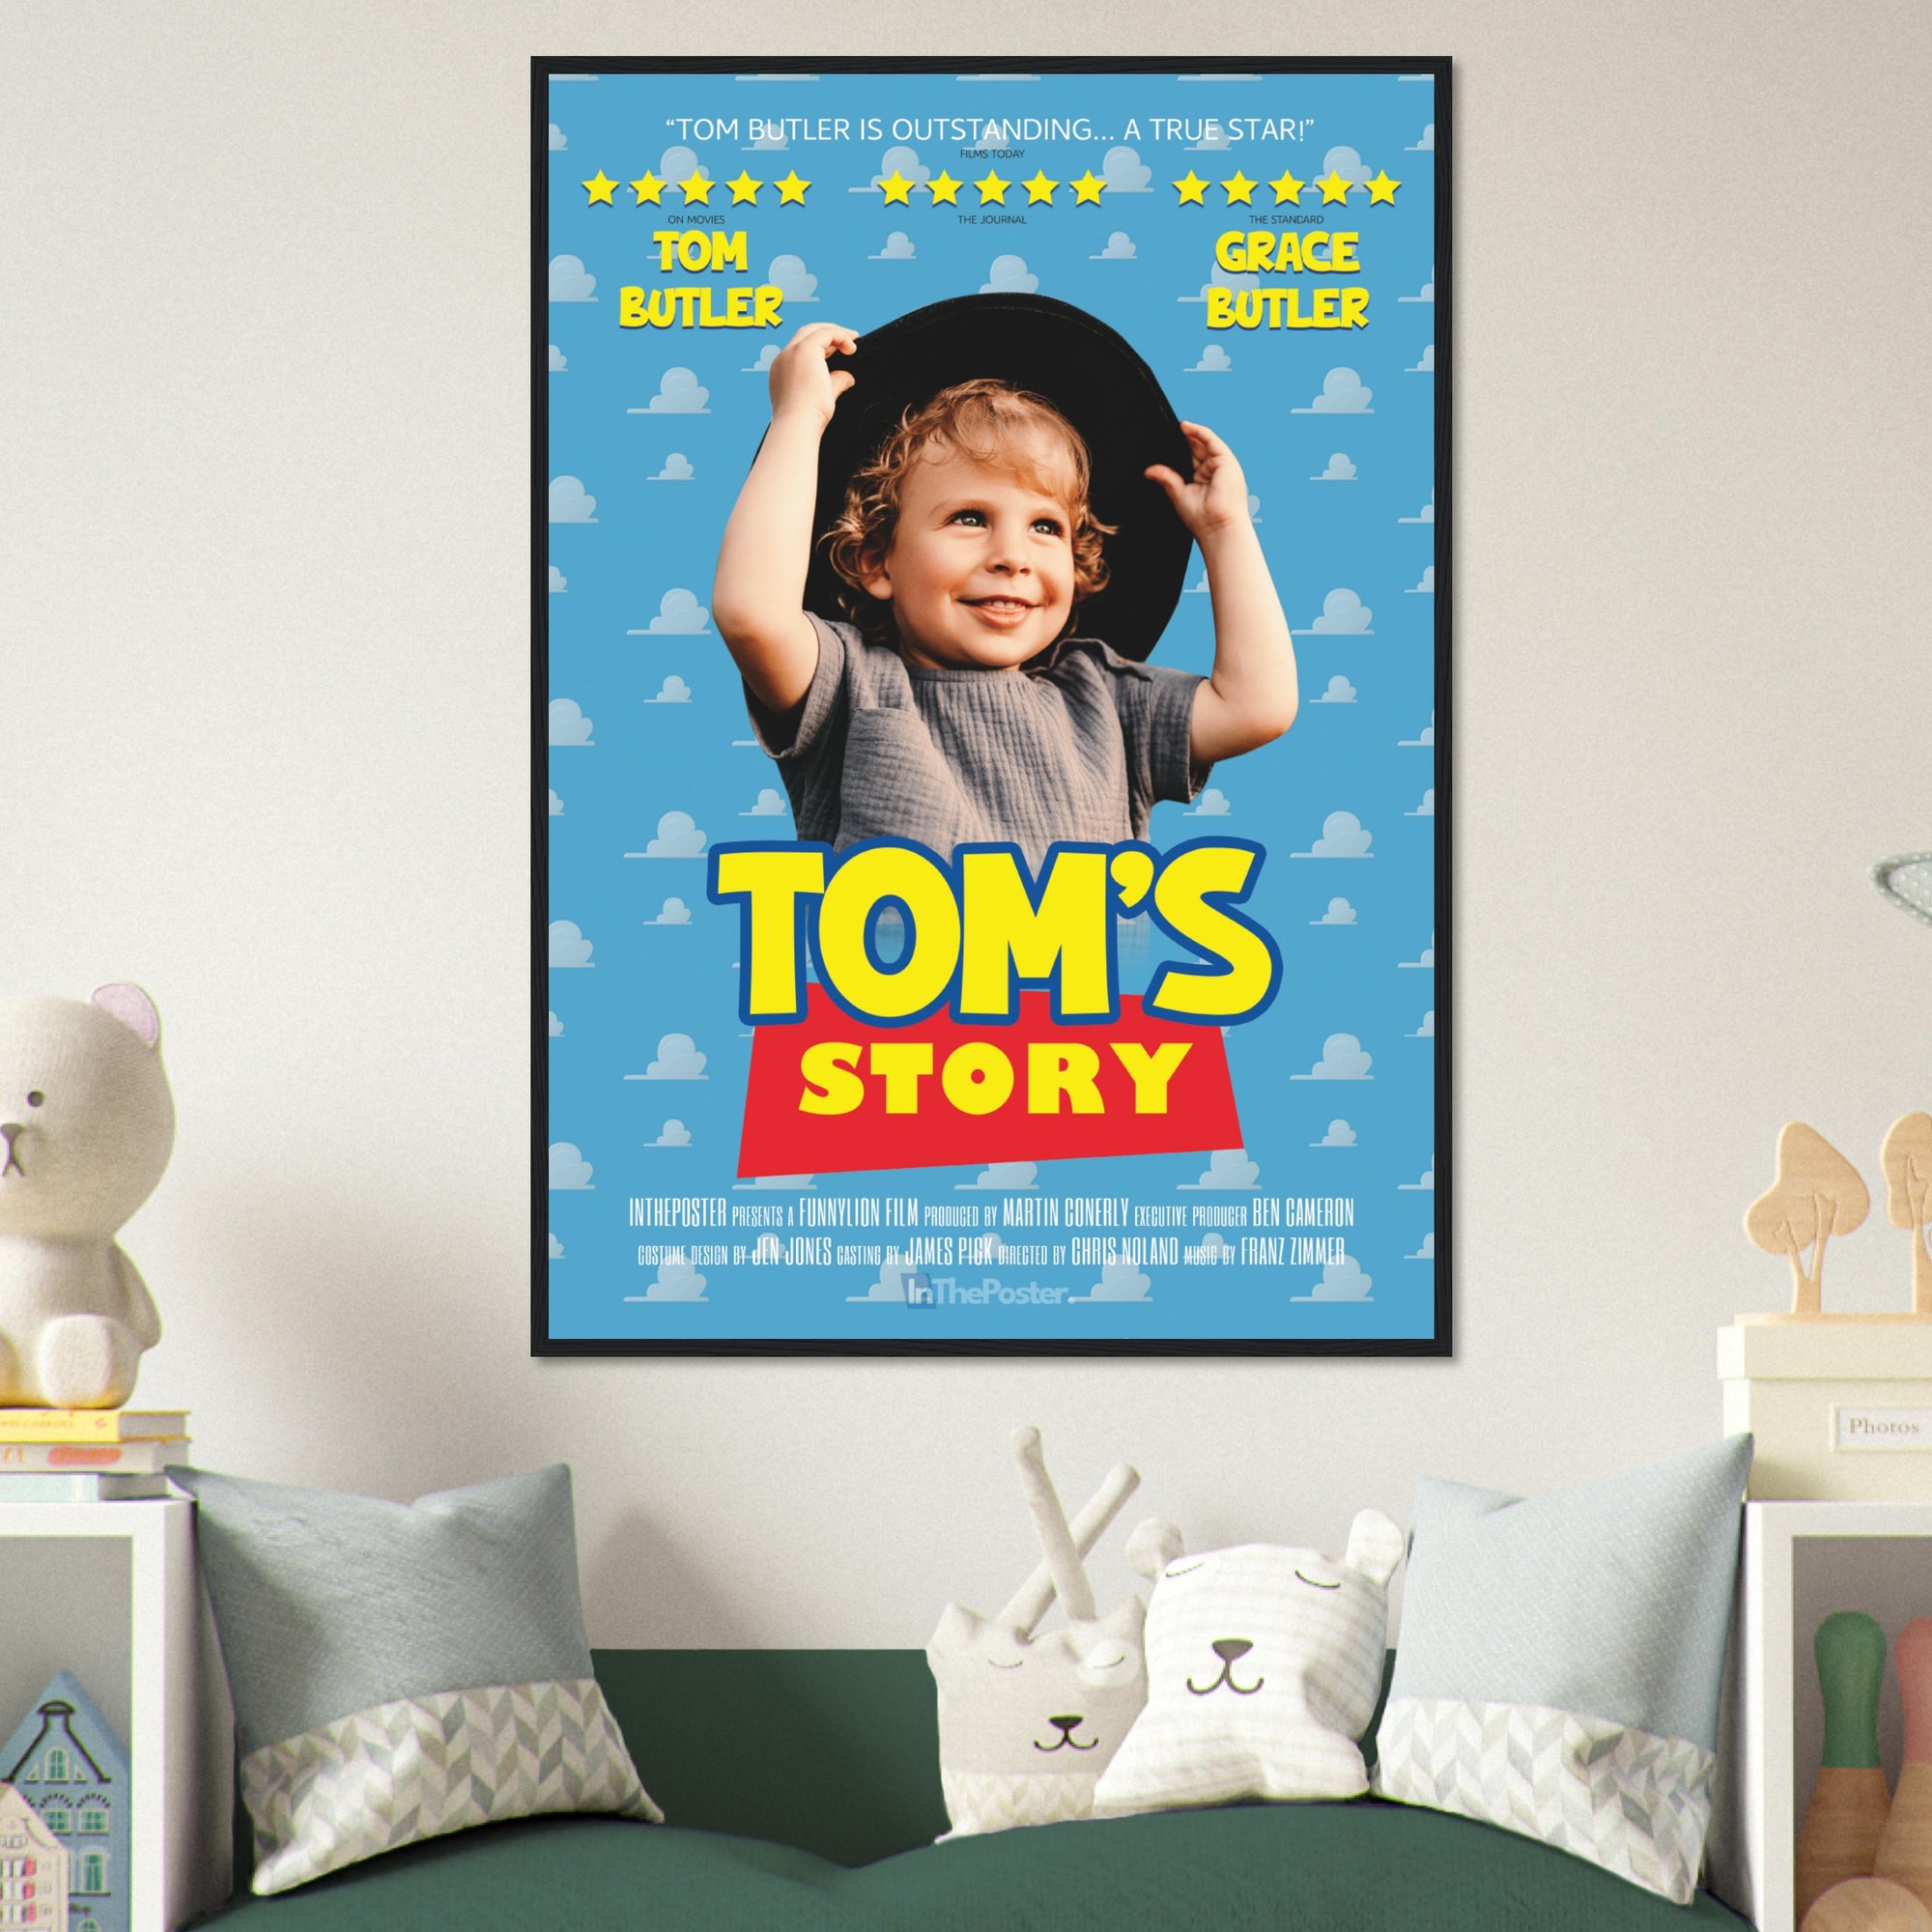 A Toy Story inspired movie poster design in a XL black frame, on a grey wall in a kids bedroom